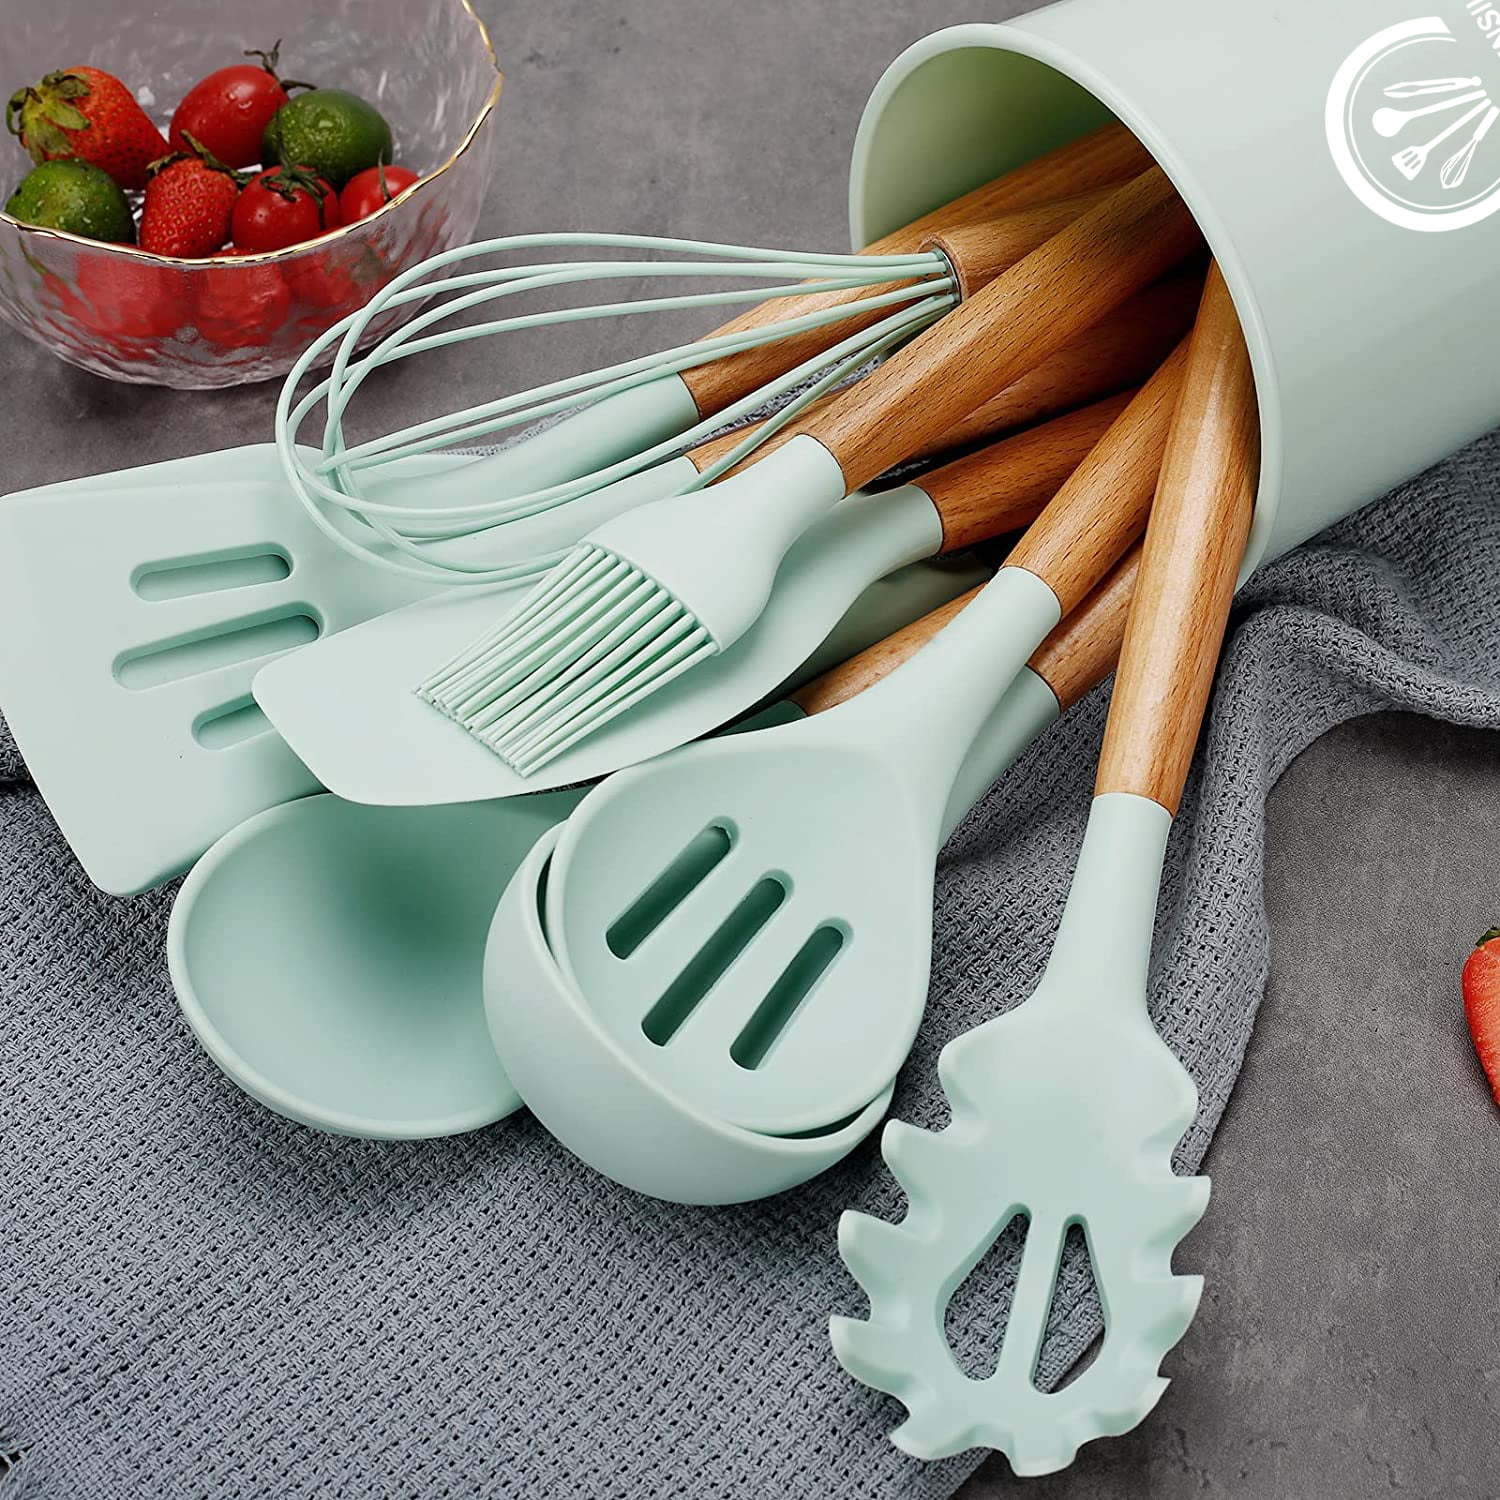 Silicone Cooking Utensils Set - 446°F Heat Resistant Silicone Kitchen  Utensils for Cooking,Kitchen Utensil Spatula Set w Wooden Handles and Holder,  BPA FREE Gadgets for Non-Stick Cookware (White) 